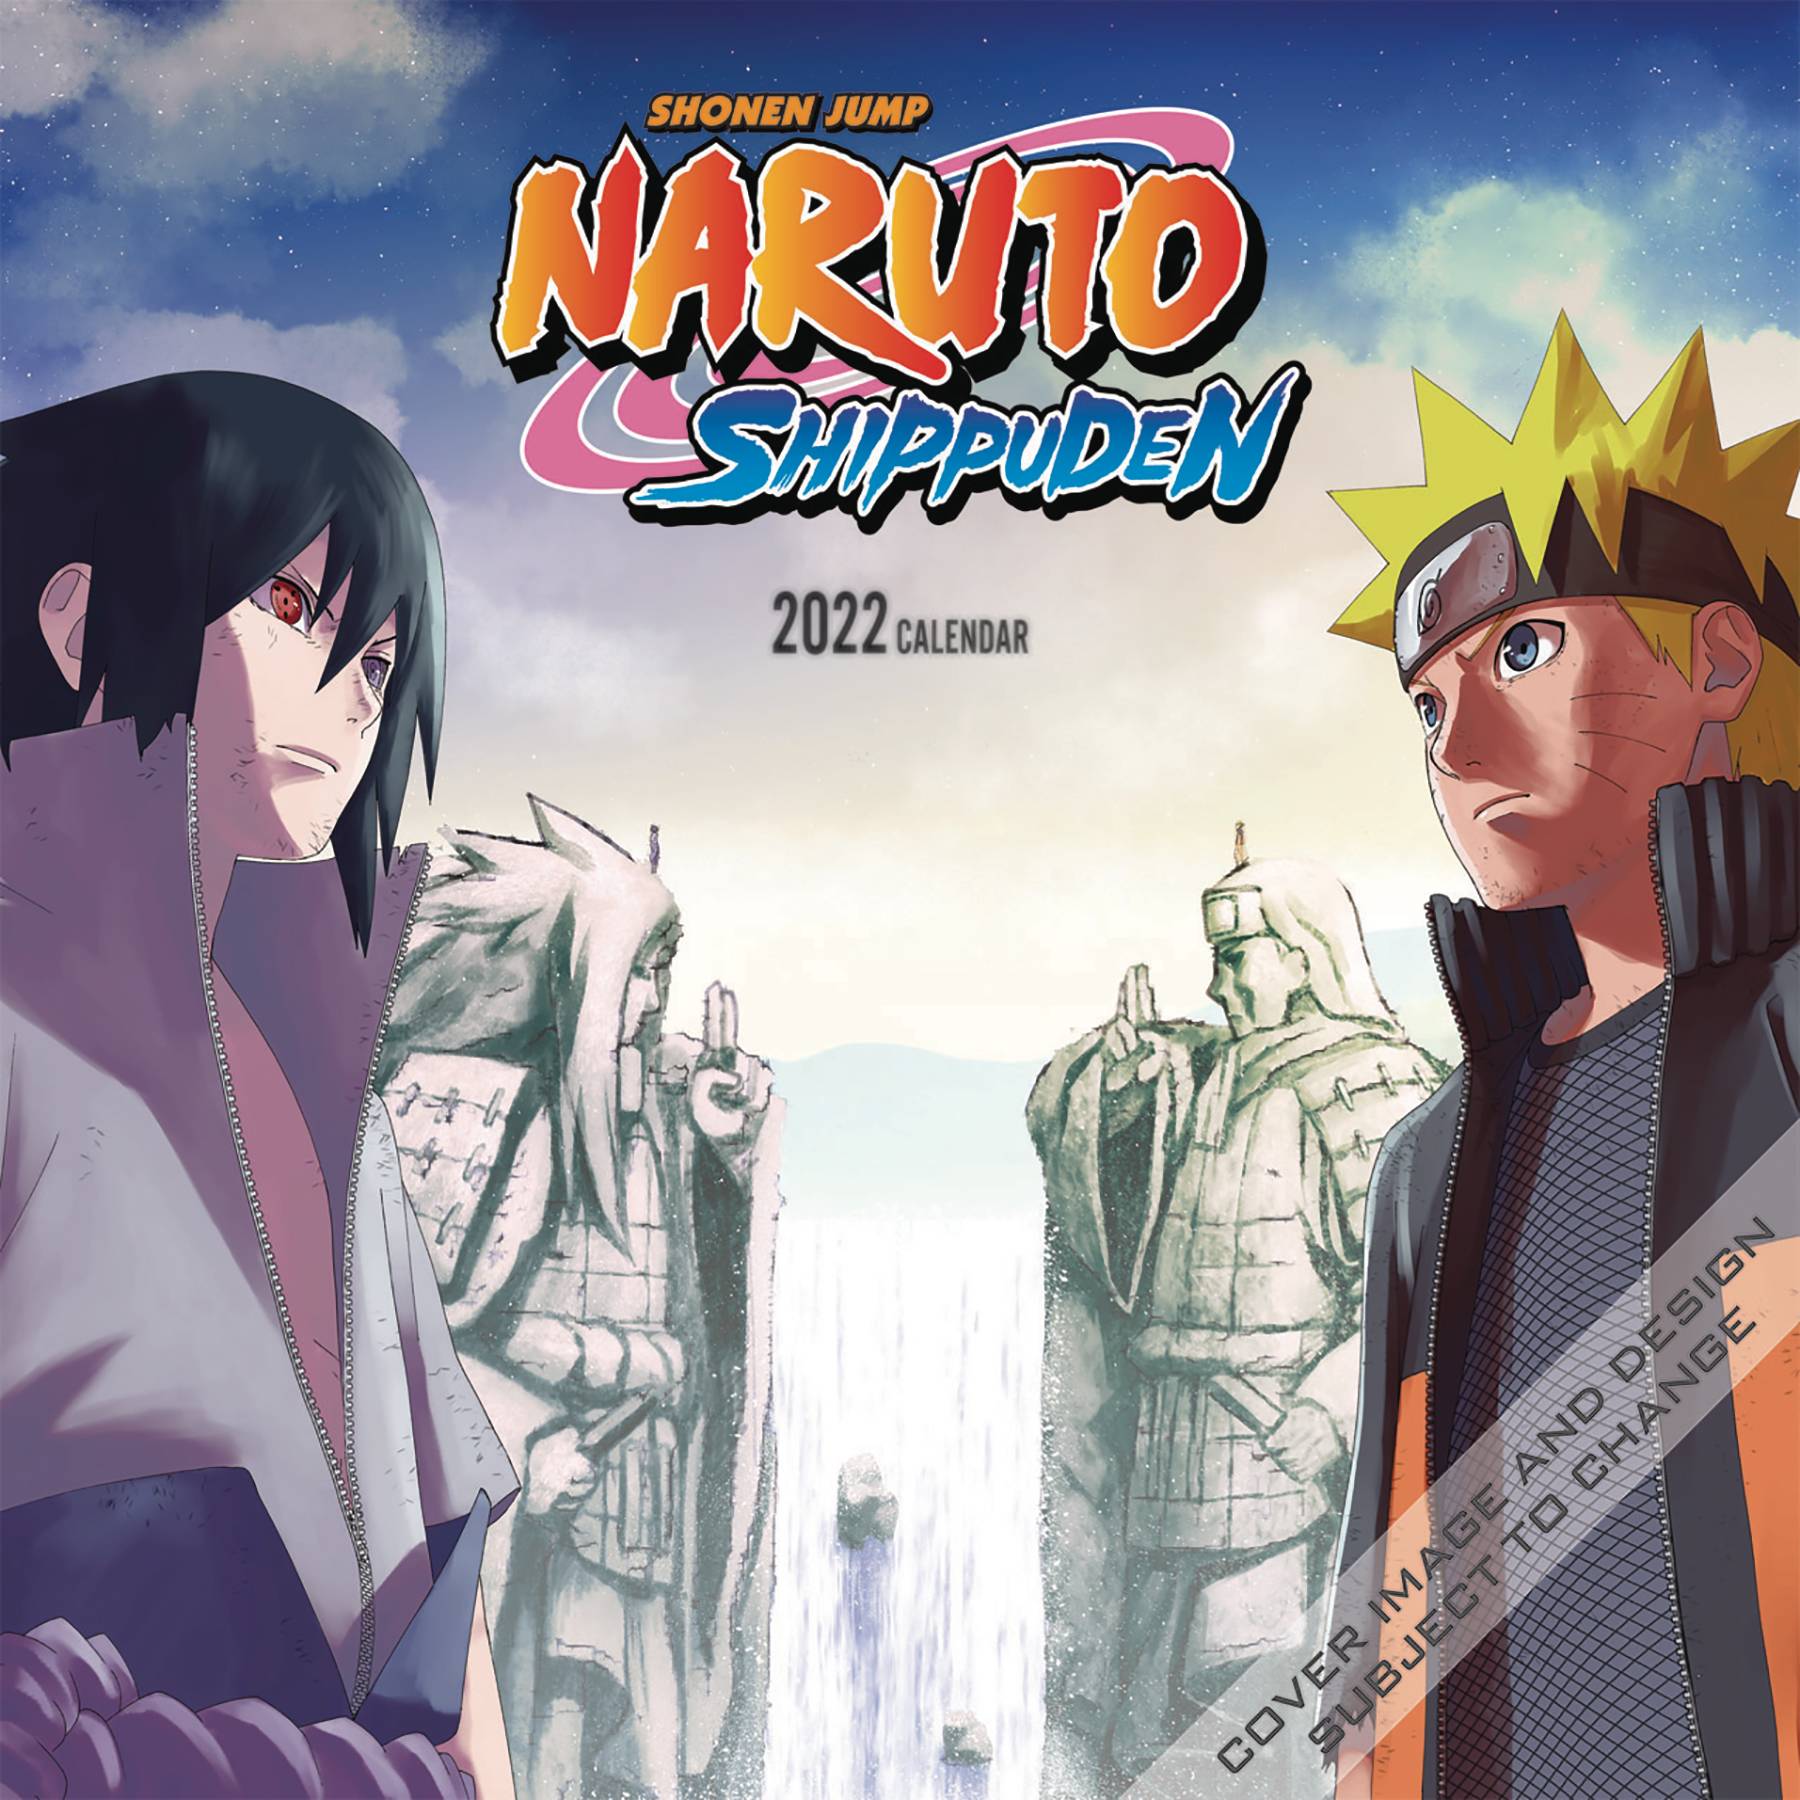 Songs from FLOW and Anly chosen to open and close Boruto in January 2022   Neon Sakura